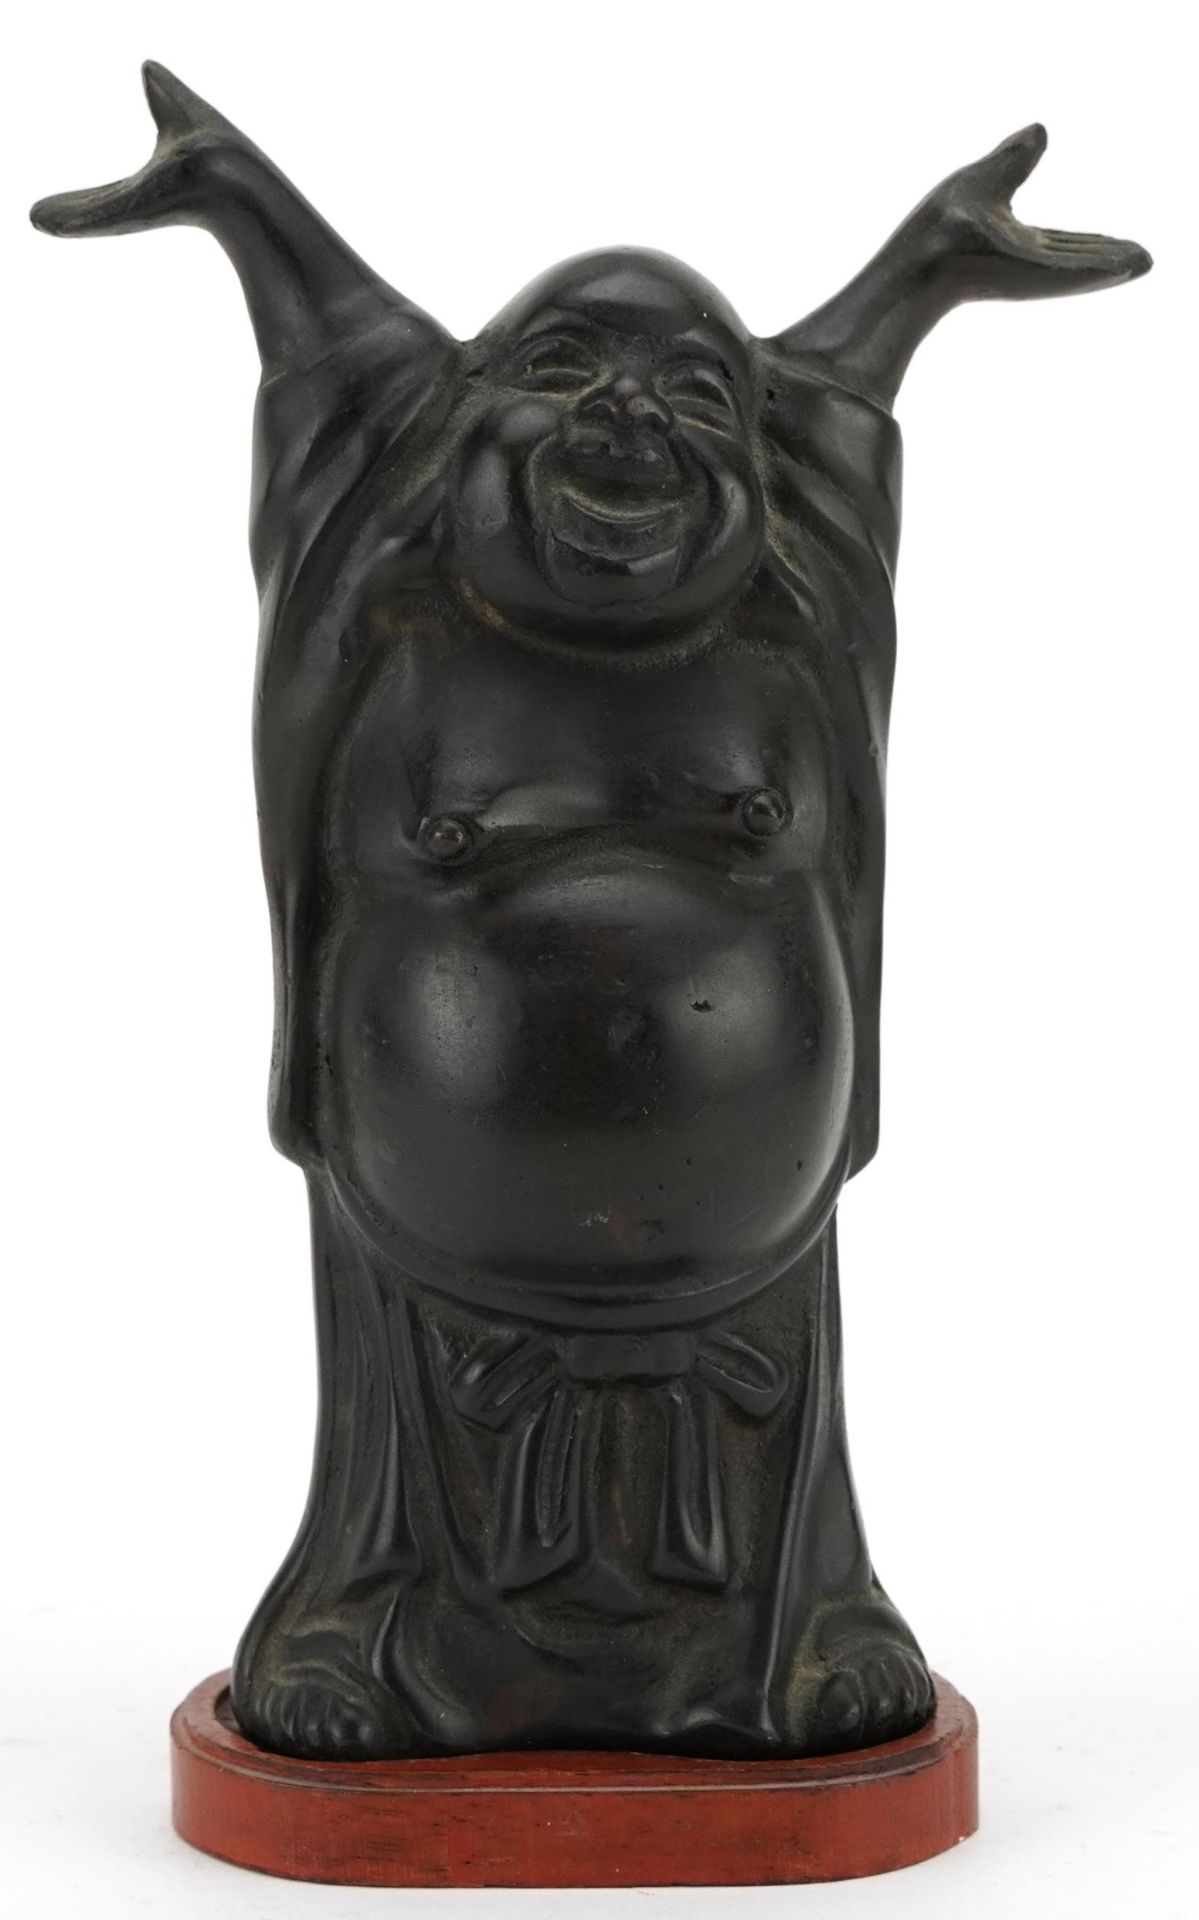 Chinese patinated bronze figure of Buddha raised on a hardwood stand, 19cm high